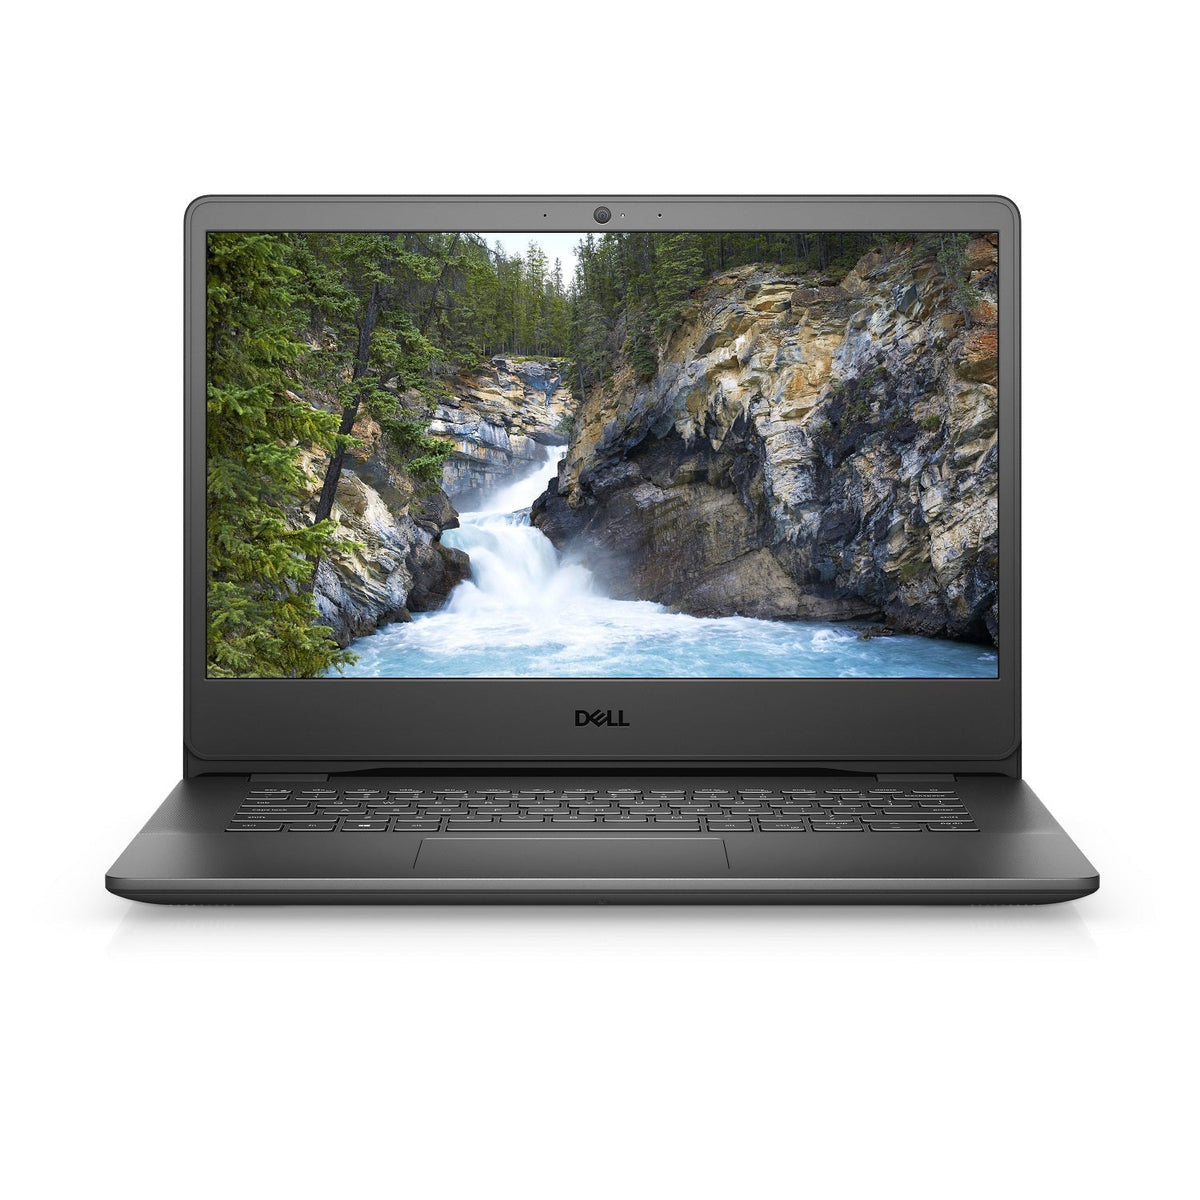 Laptop Dell Vostro 3400, i5-1135G7, 16GB, SSD 256GB + 1TB HDD, 14'' HD, FreeDOS + Mouse Microsoft 1850